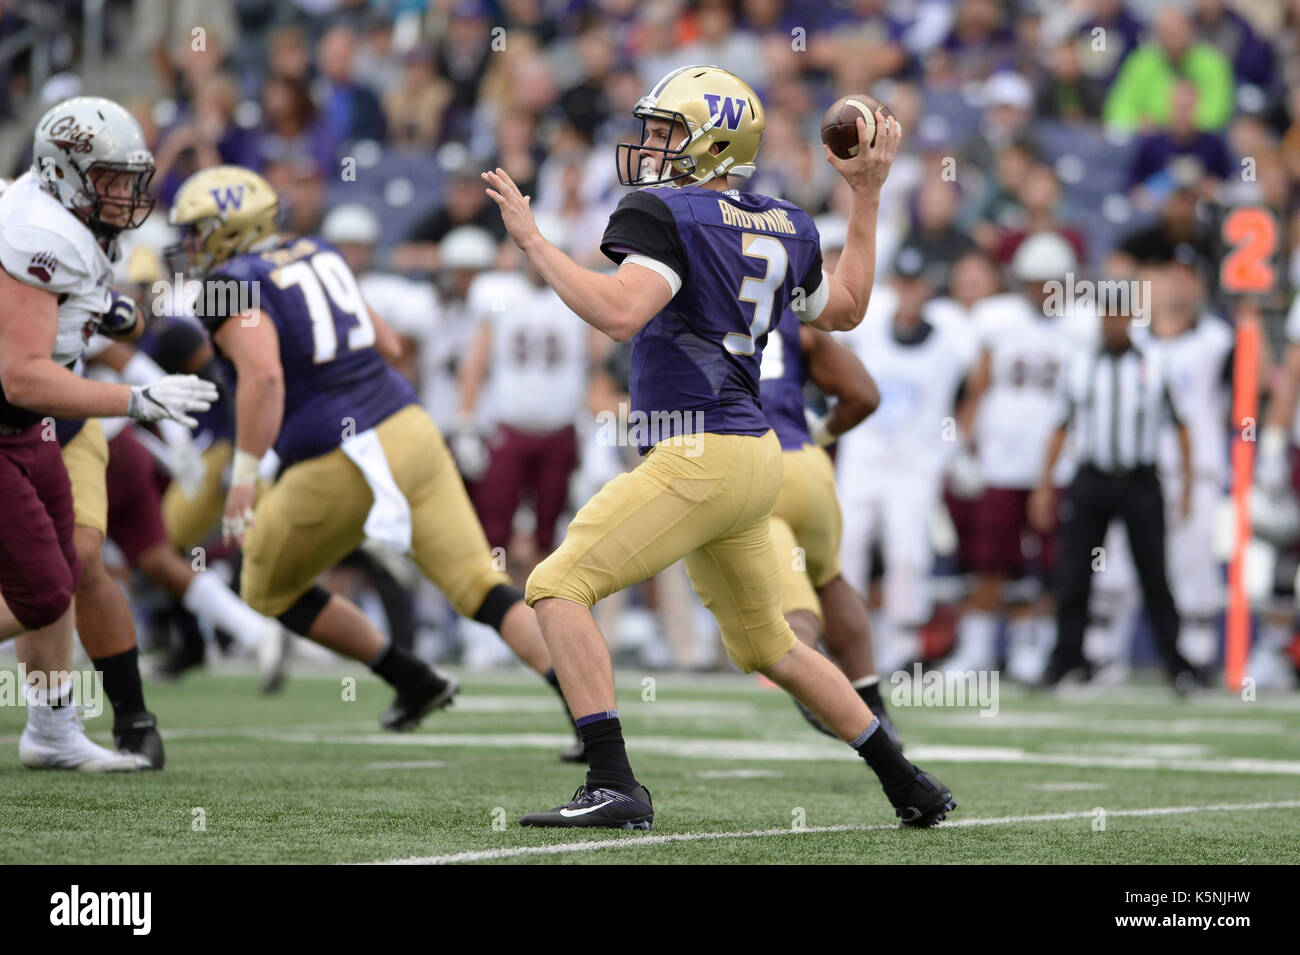 Seattle, WA, USA. 9th Sep, 2017. UW quarterback Jake Browning (3) in action during a game between the Montana Grizzlies and the Washington Huskies at Husky Stadium in Seattle, WA. Jeff Halstead/CSM/Alamy Live News Stock Photo